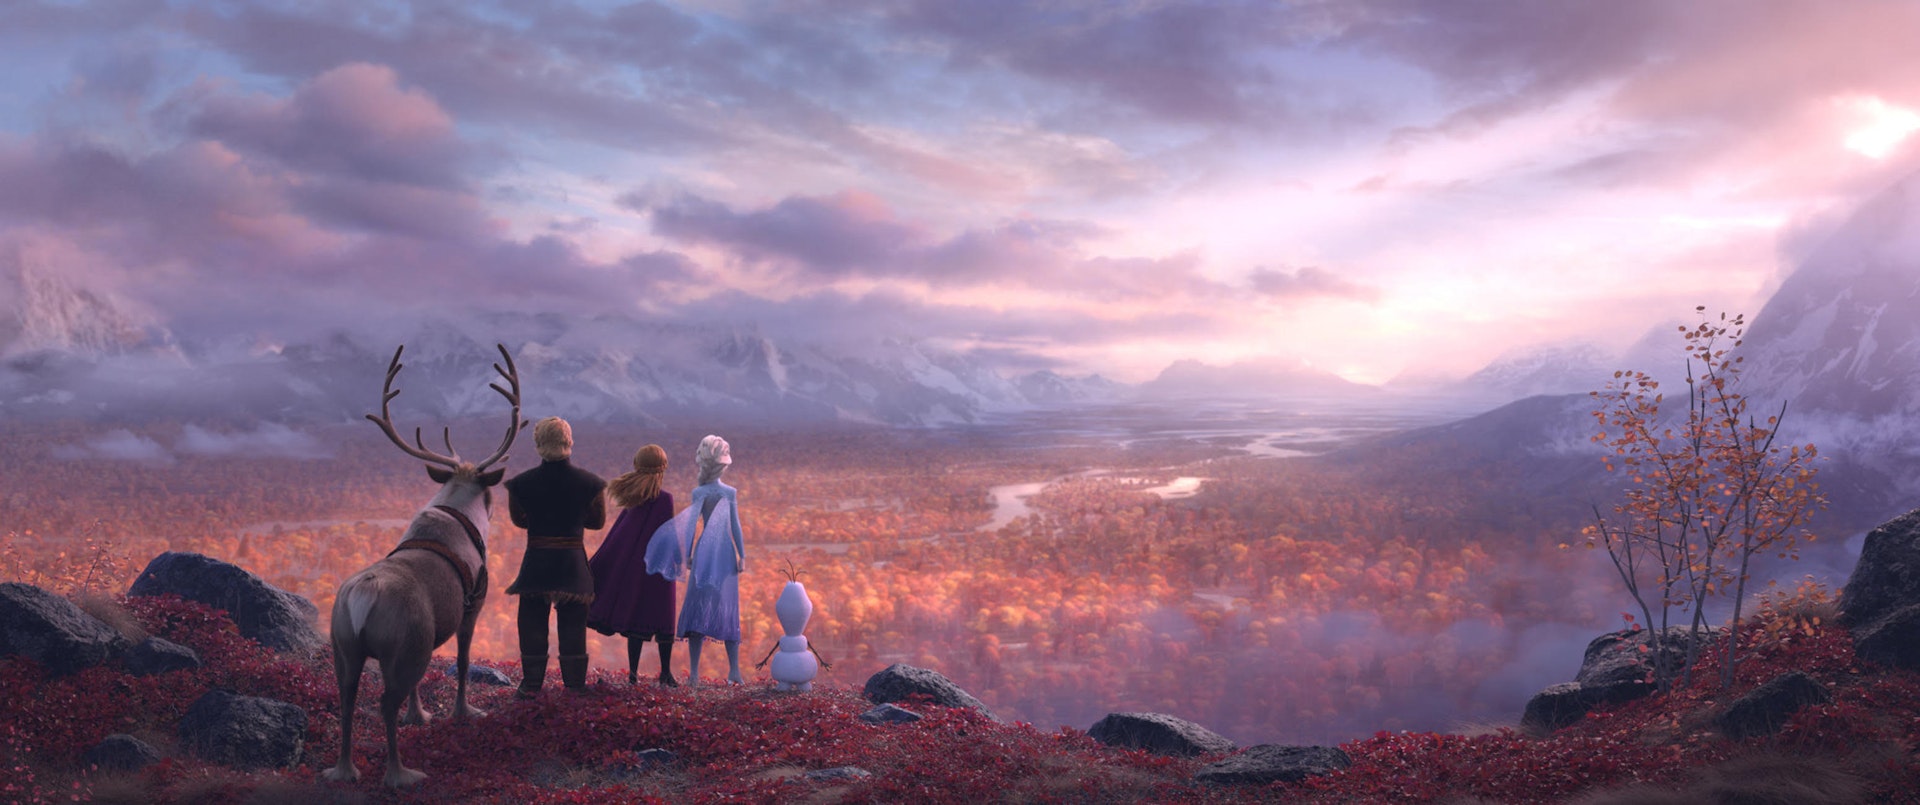 The cast of Frozen 2 overlook a gloomy, autumn forest